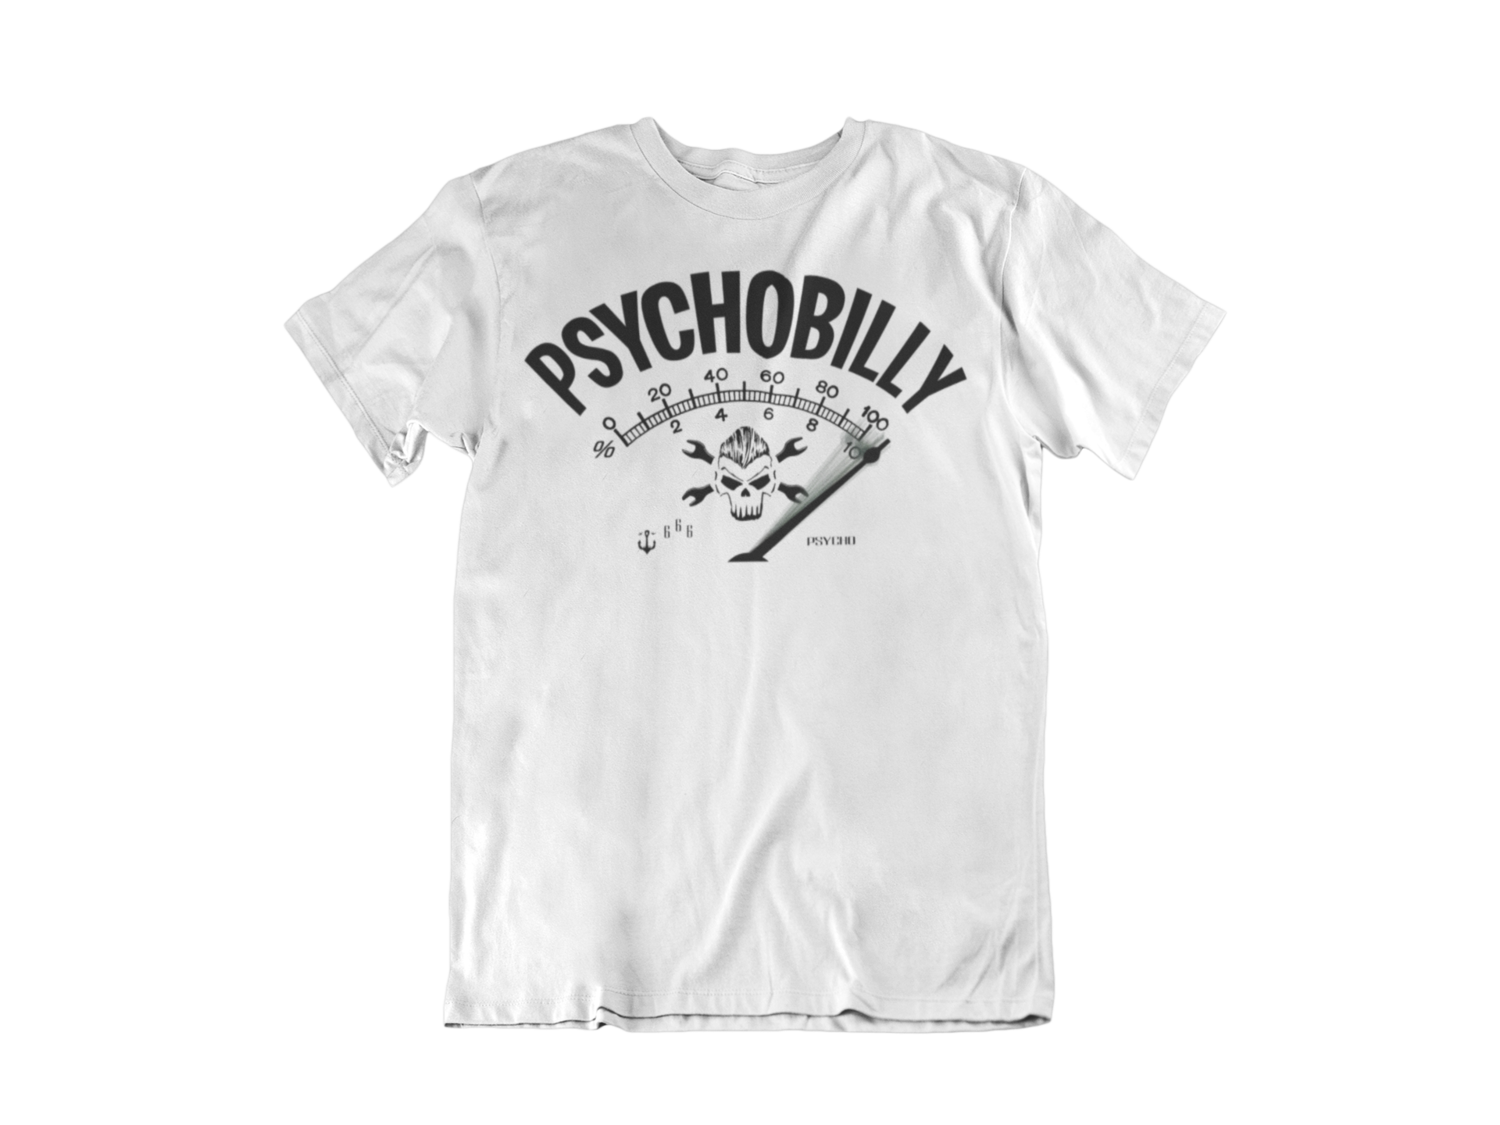 PSYCHOBILLY T-SHIRT MAN BY SUBCULTBILLY DESIGN